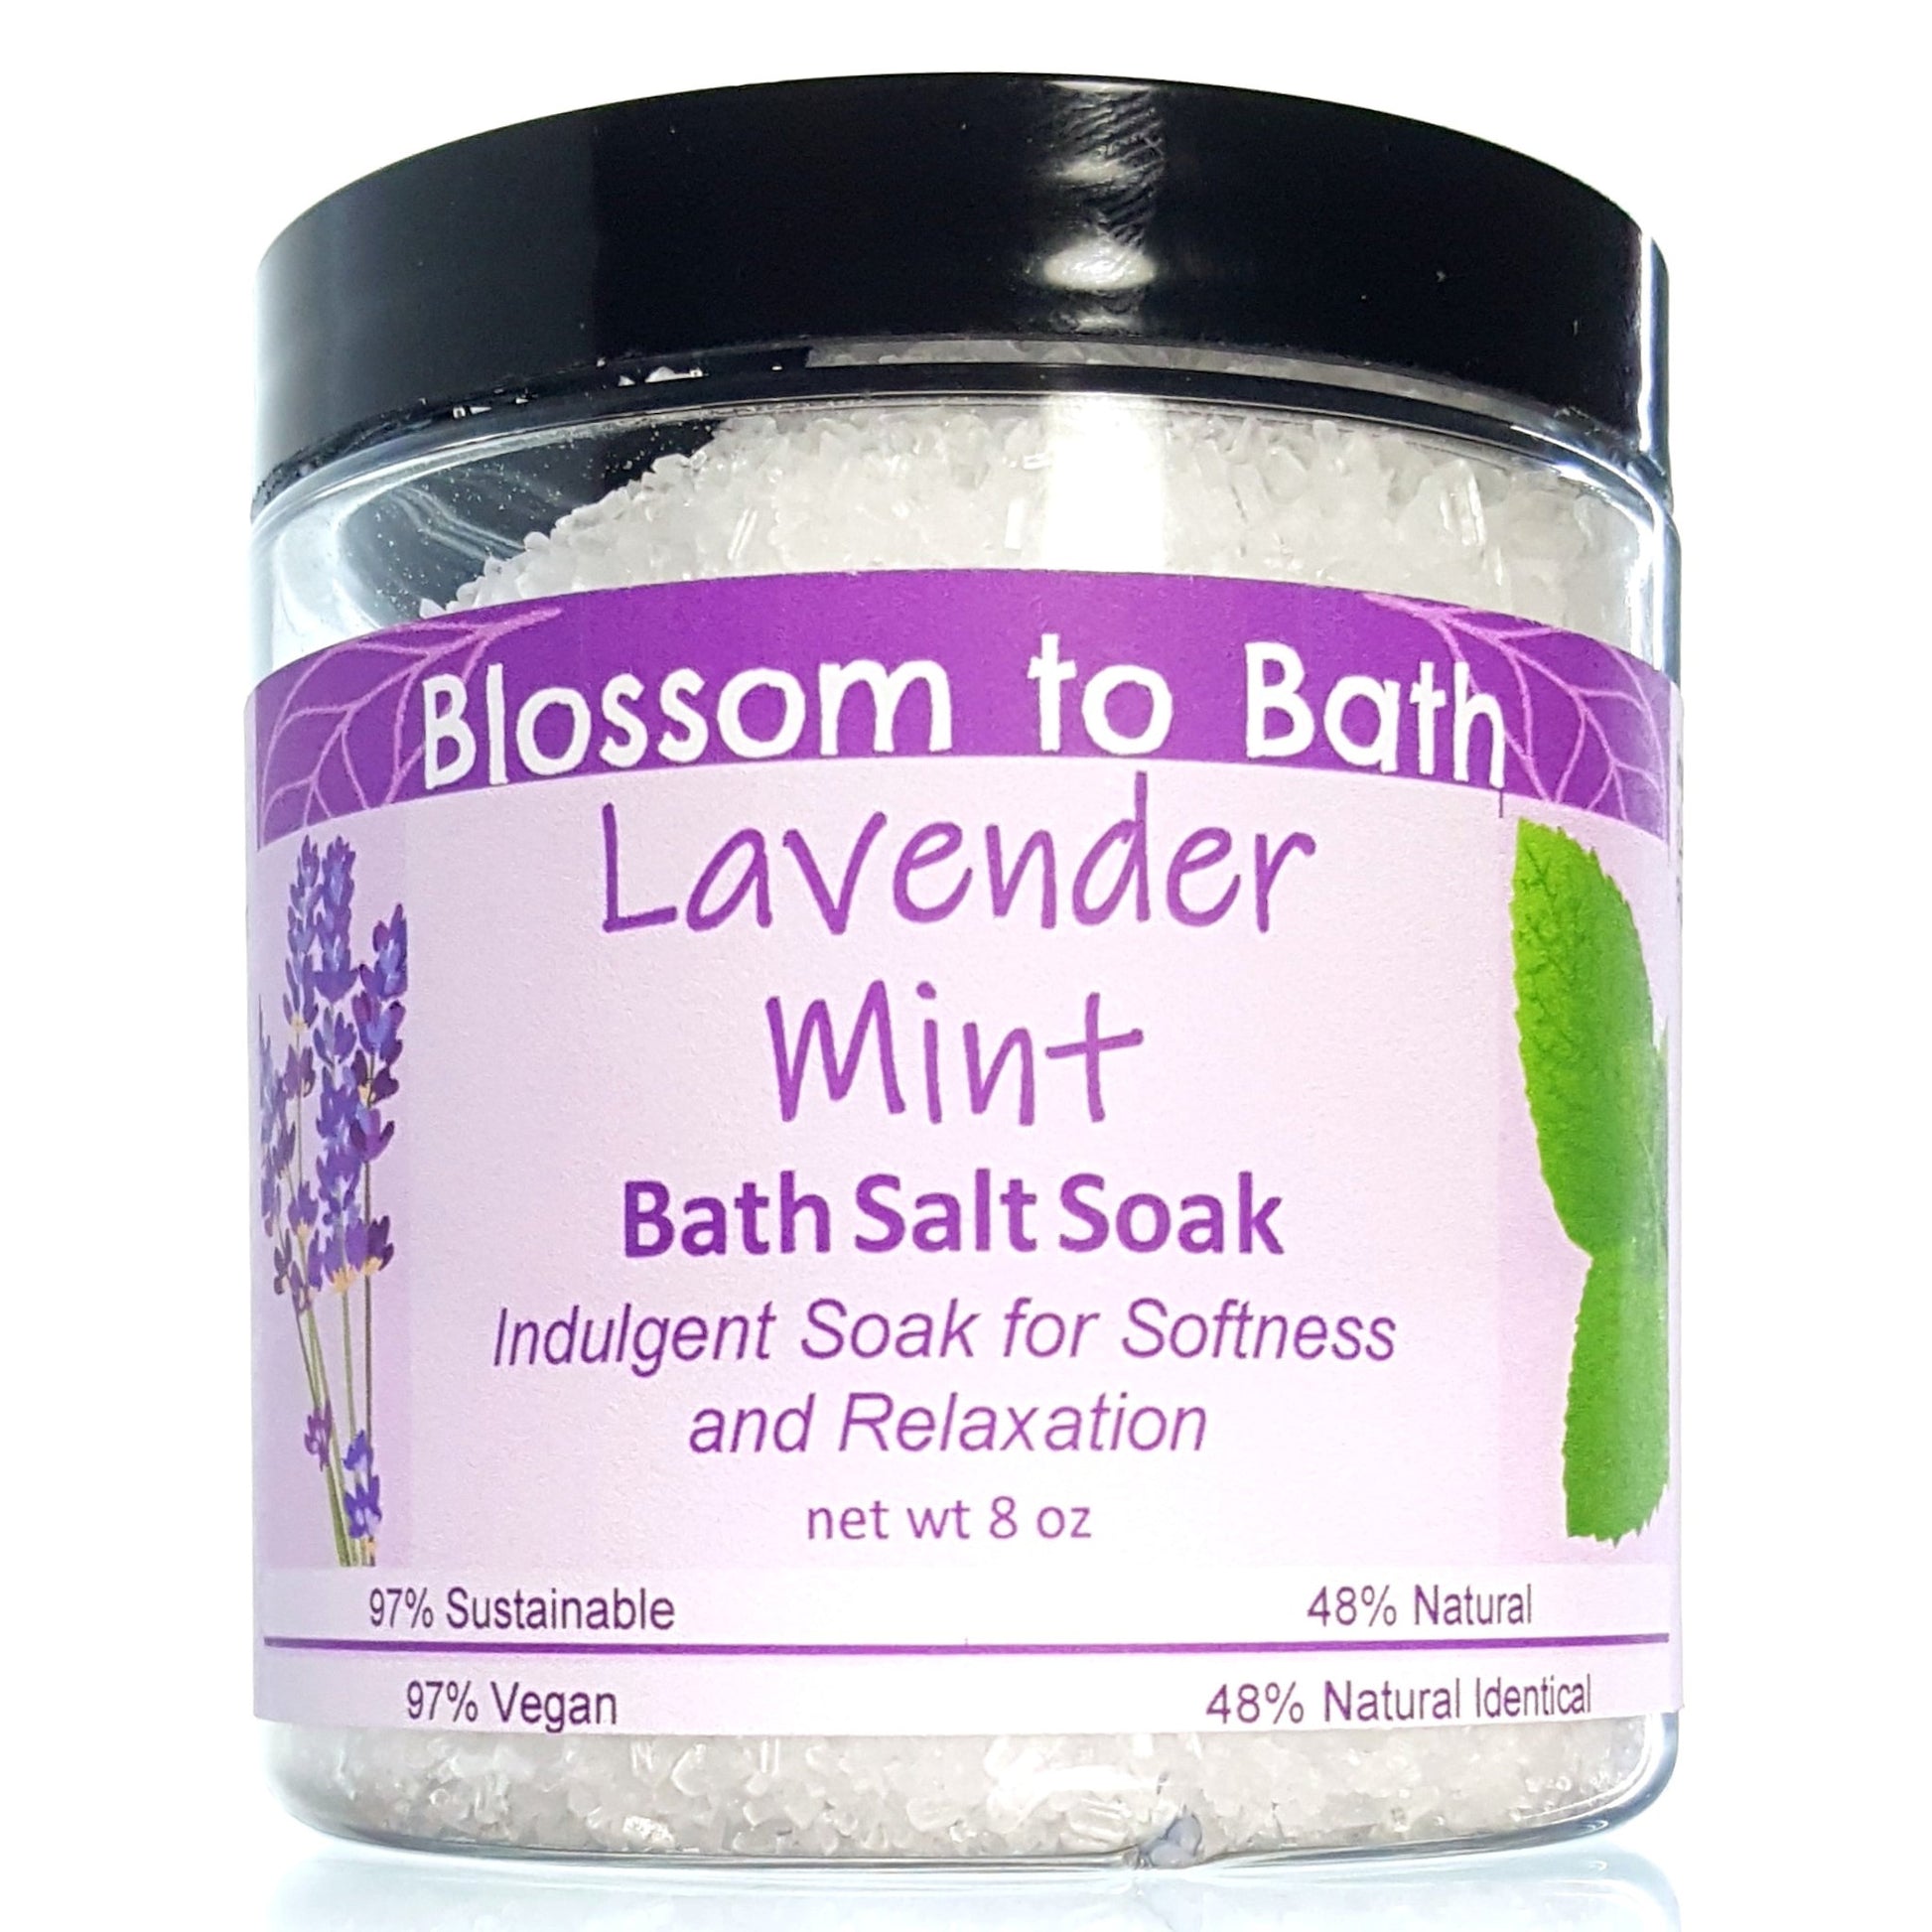 Buy Blossom to Bath Lavender Mint Bath Salt Soak from Flowersong Soap Studio.  Scented epsom salts for a luxurious soaking experience  A cheerfully relaxing combination of lavender and peppermint.